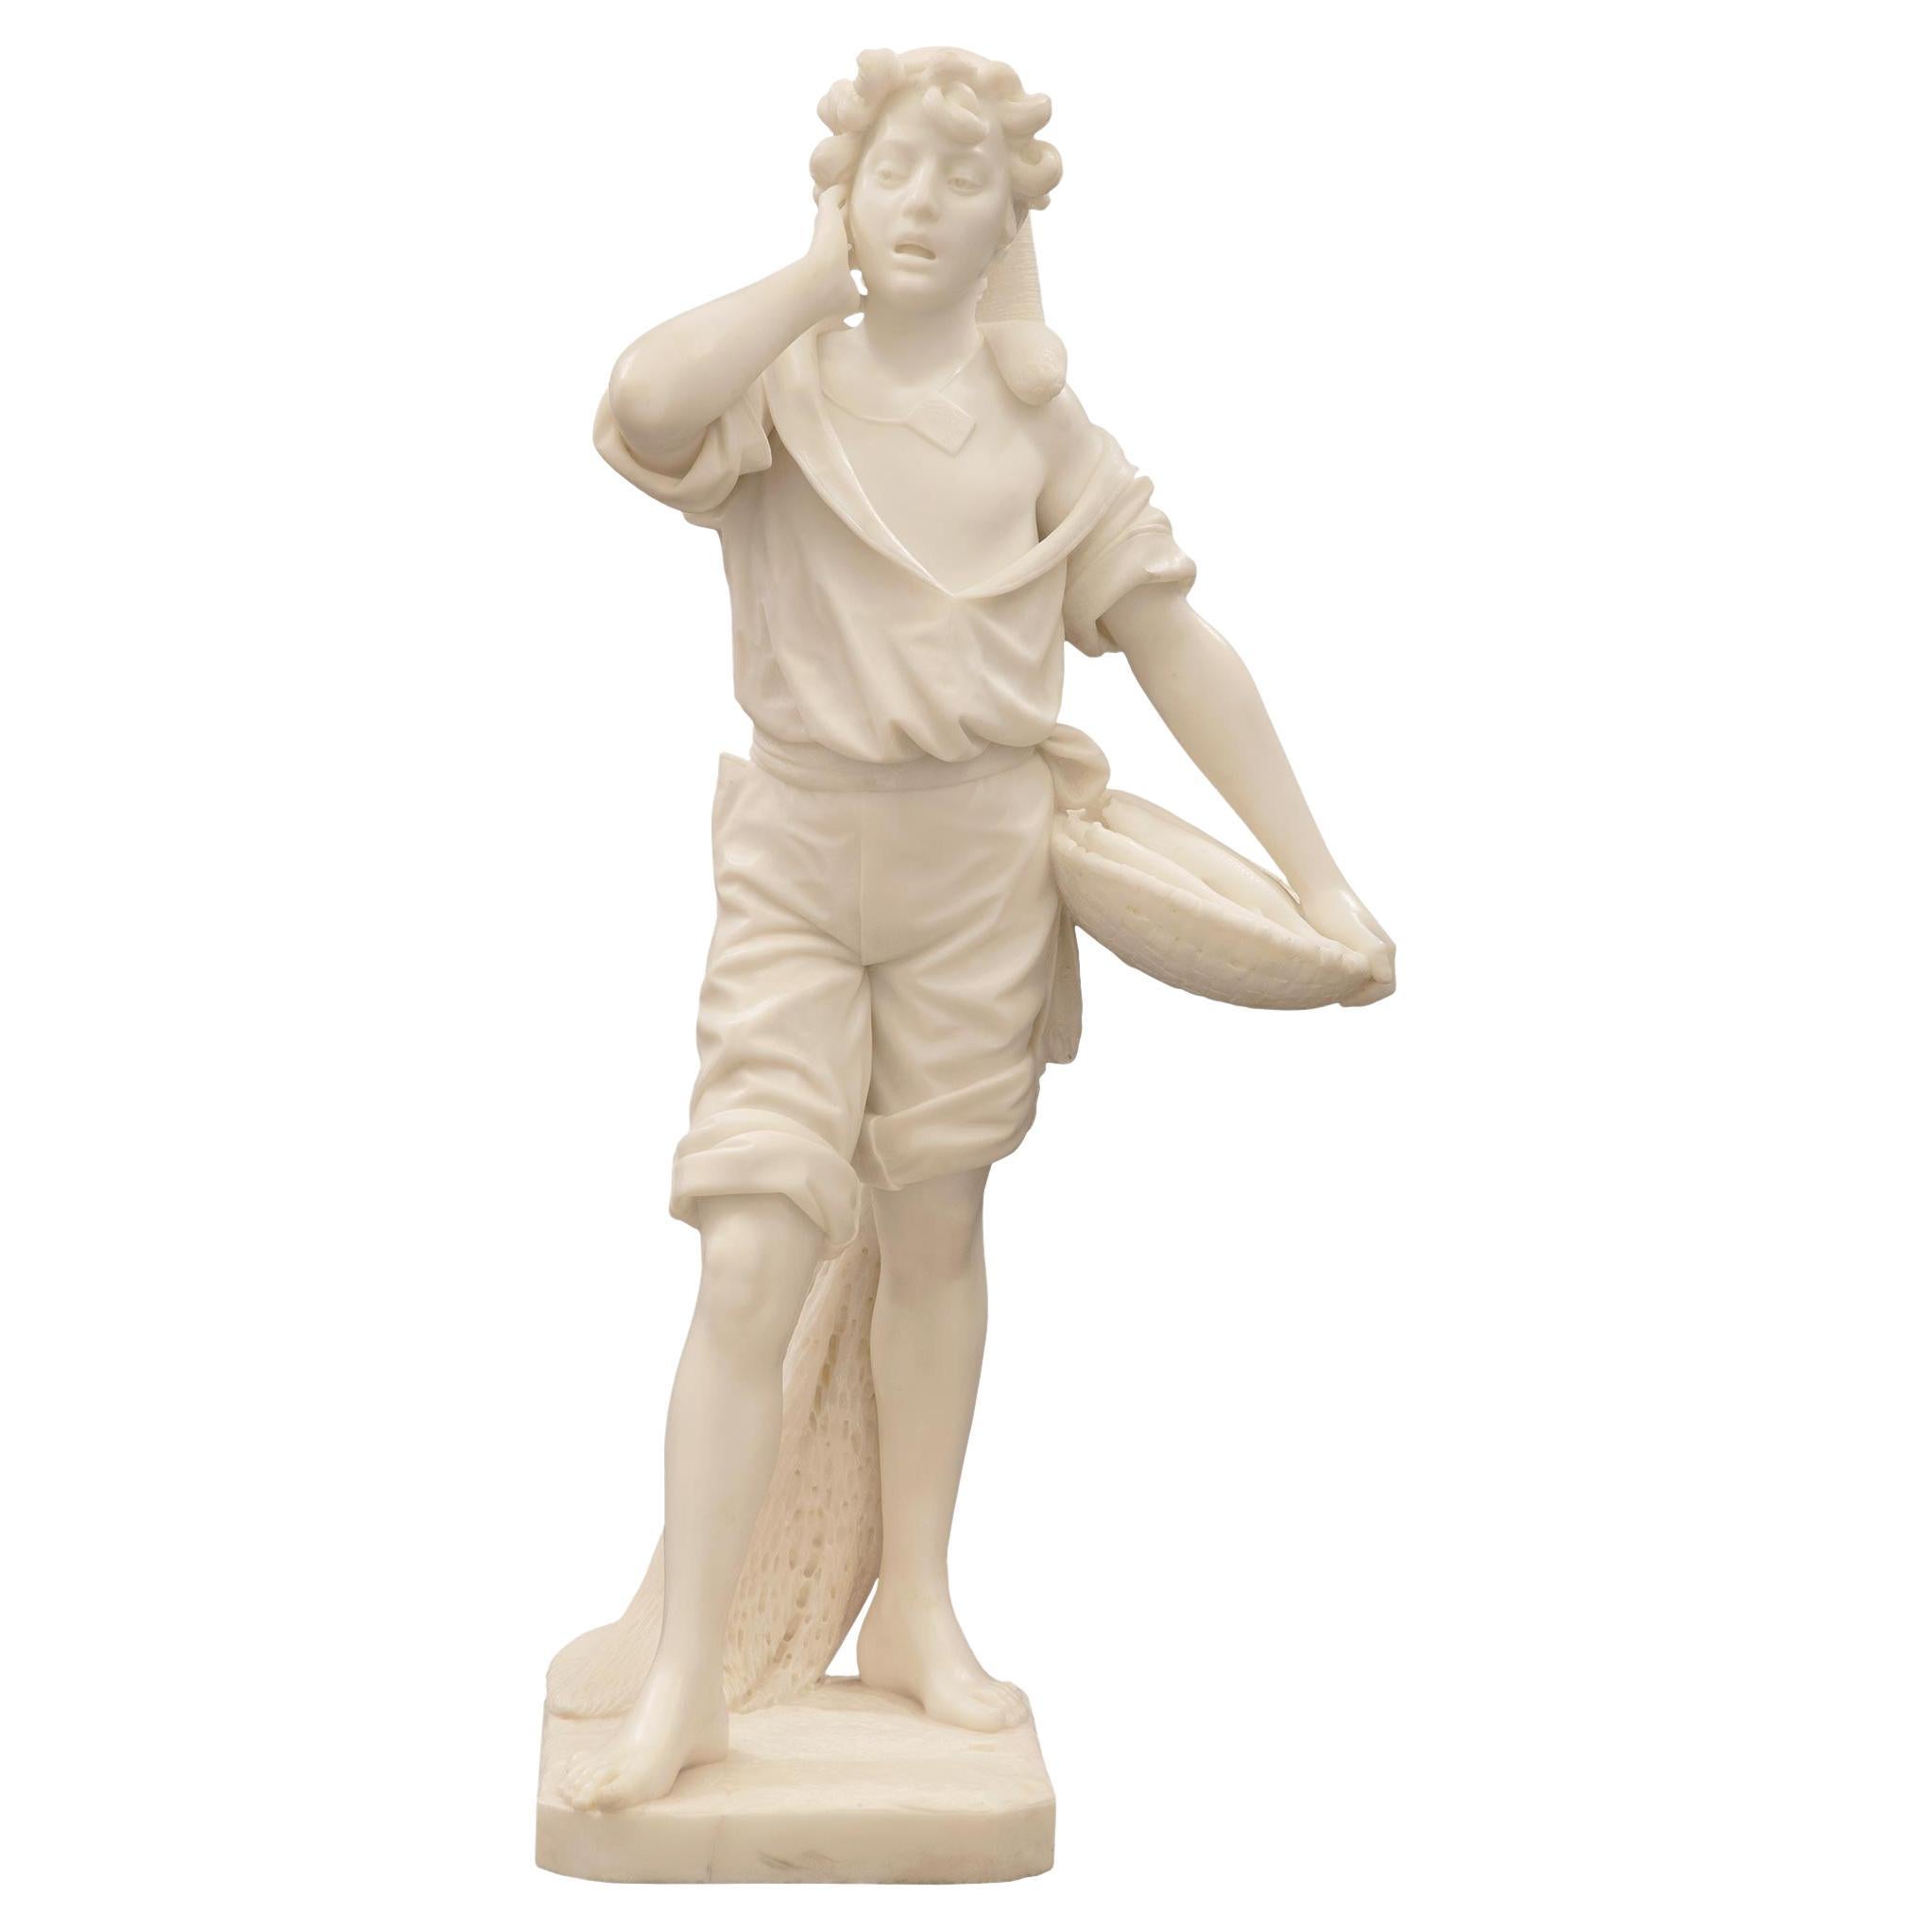 Italian 19th Century Solid White Carrara Marble Statue of a Young Fisherman For Sale